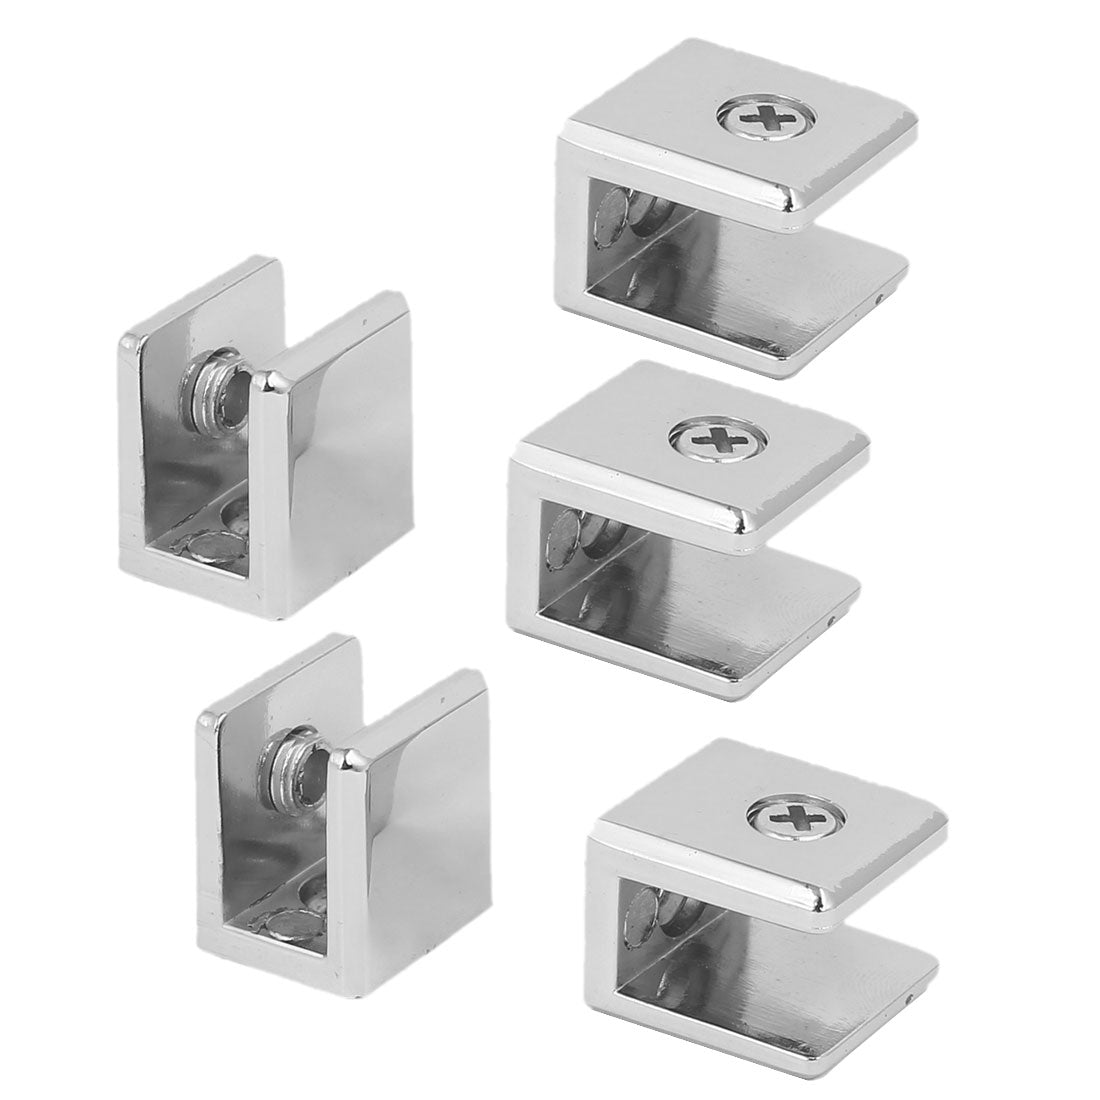 uxcell Uxcell Zinc Alloy Wall Mounted Adjustable Glass Shelf Clip Clamp Bracket Support 5pcs